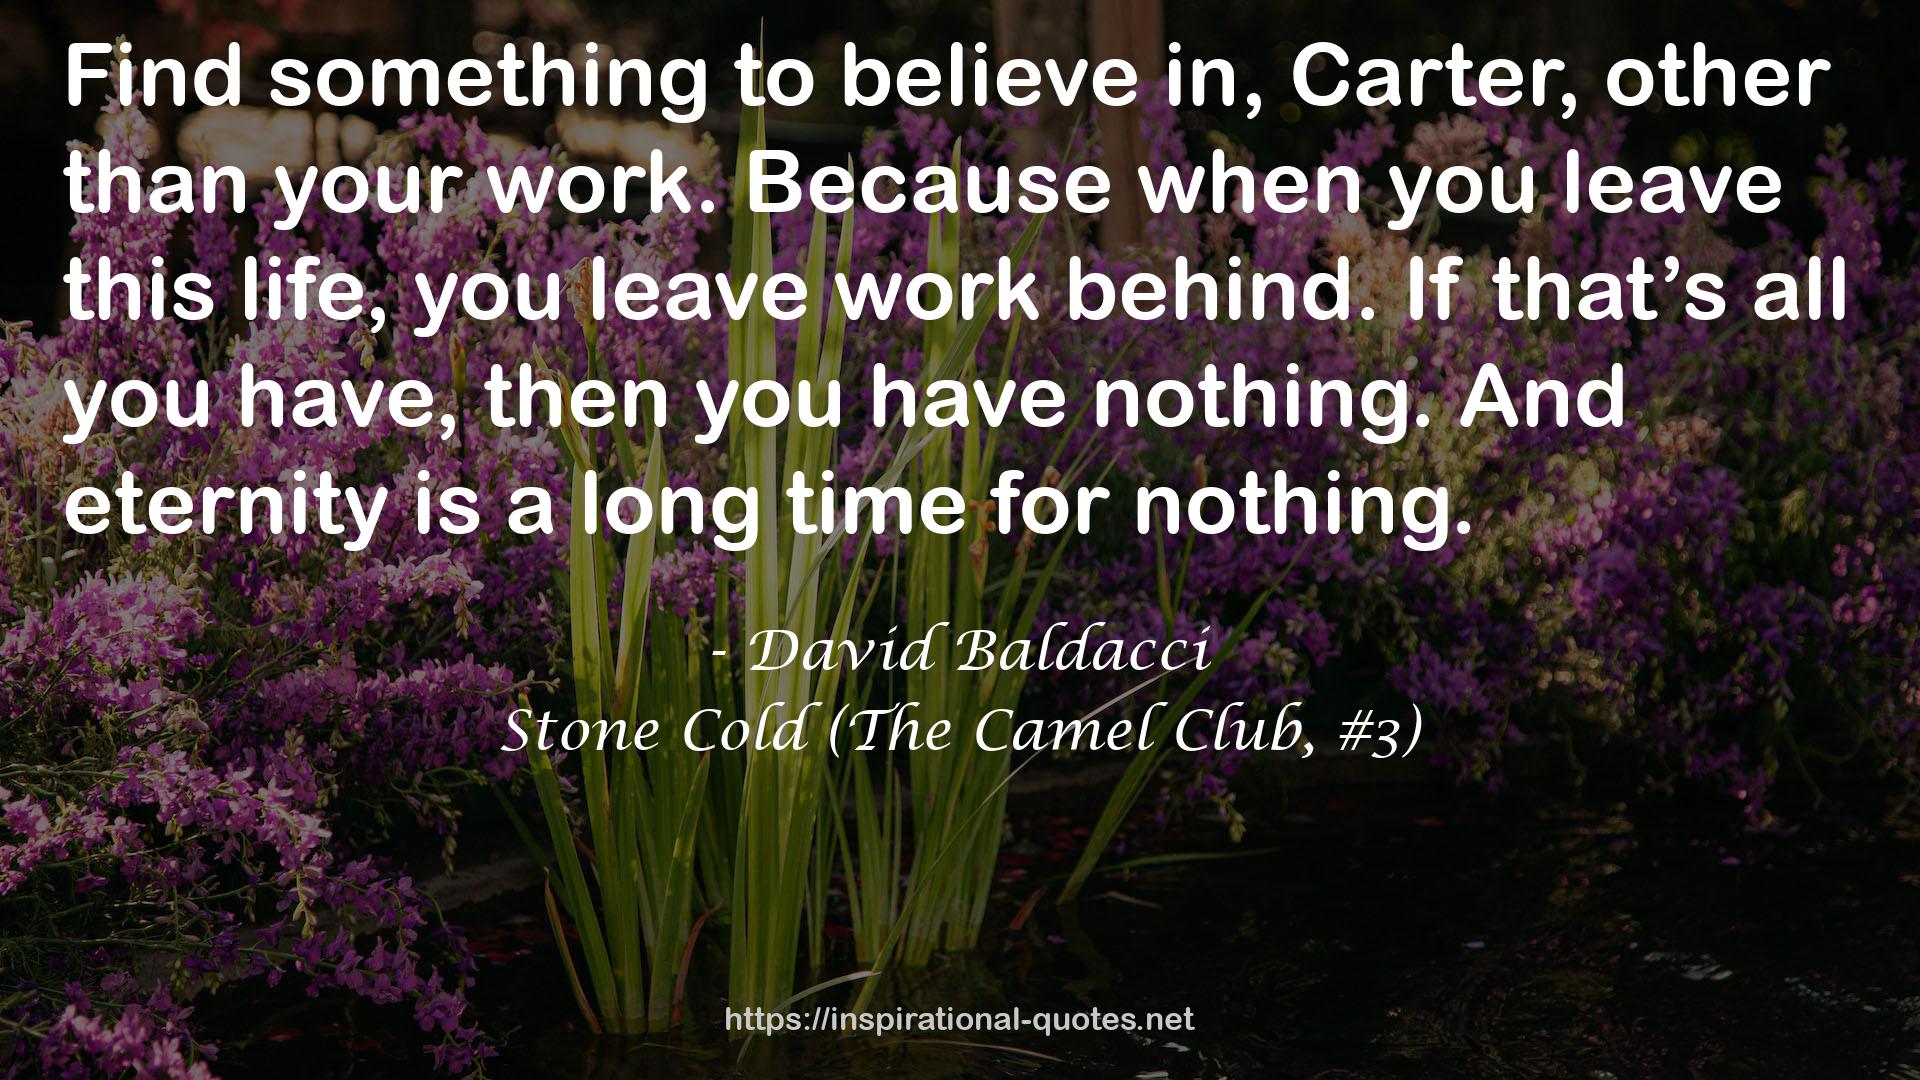 Stone Cold (The Camel Club, #3) QUOTES